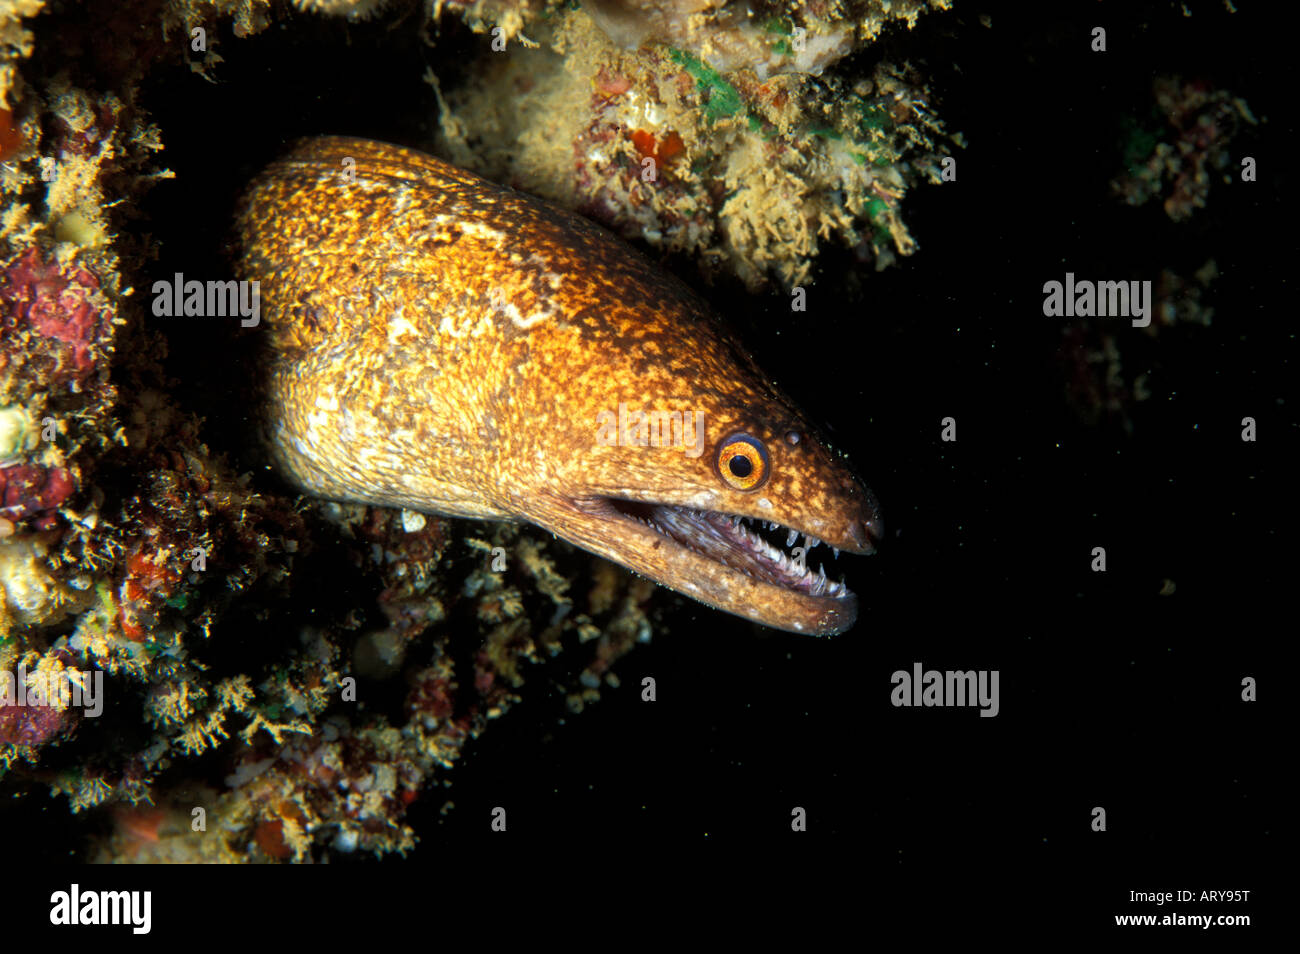 The Stout Moray Eel (Gymnothorax eurostus) hides in the cracks and crevices of Hawaii's coral reefs. Hawaiian name is Puhi. Stock Photo